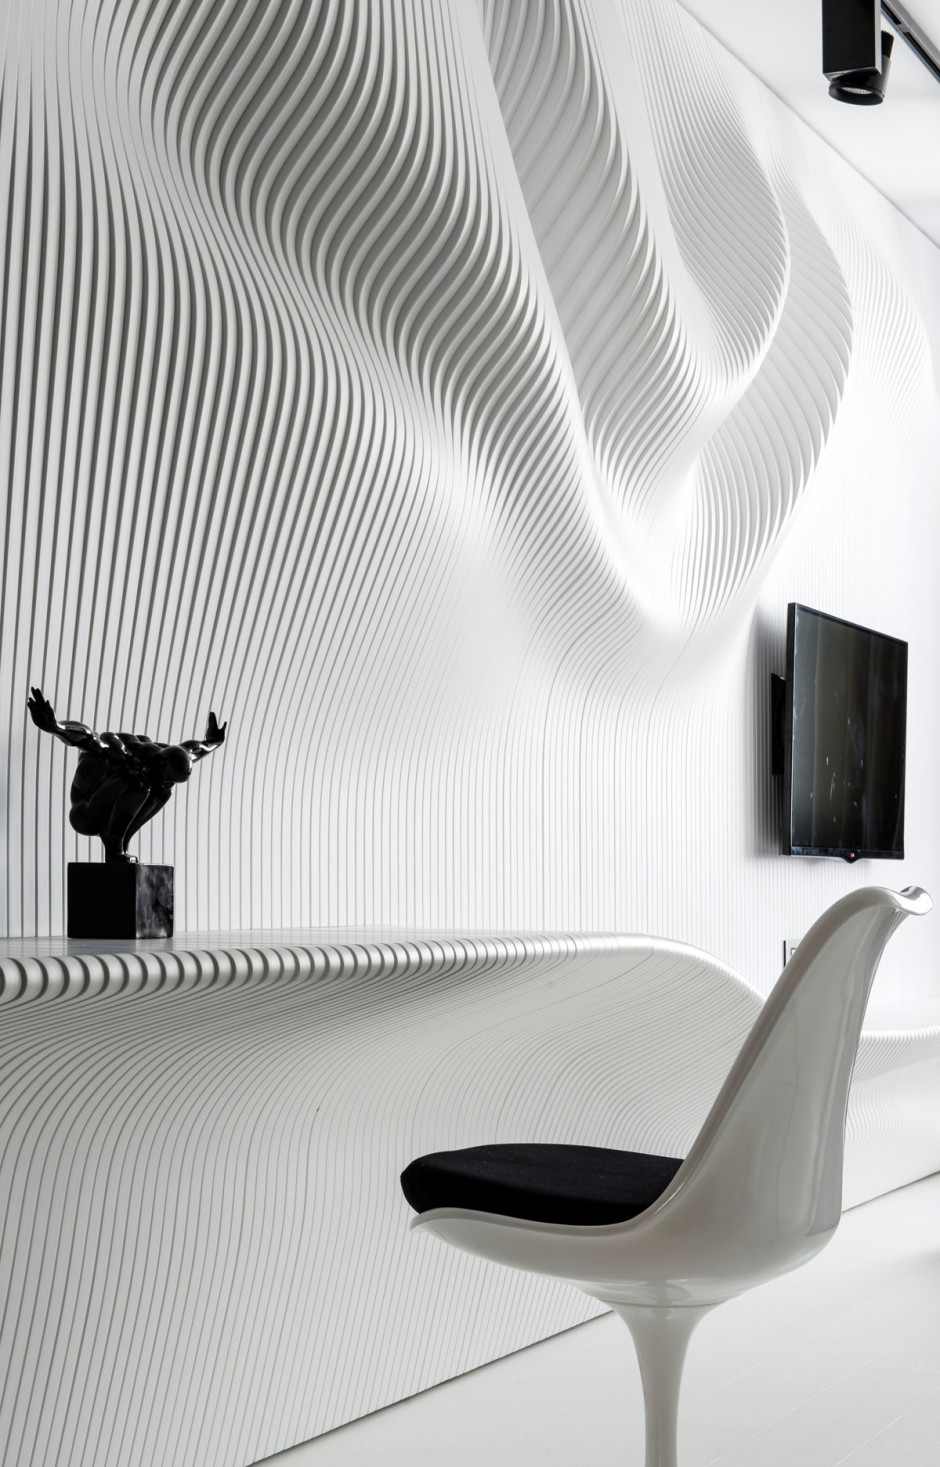 Bedroom Design With Enchanting Bedroom Design Futuristic Bedroom With White Colored Wooden Curvy Wall And Black Pendant Lamps  10 Stunning Black And White Bedroom Ideas In Fall Color Accent